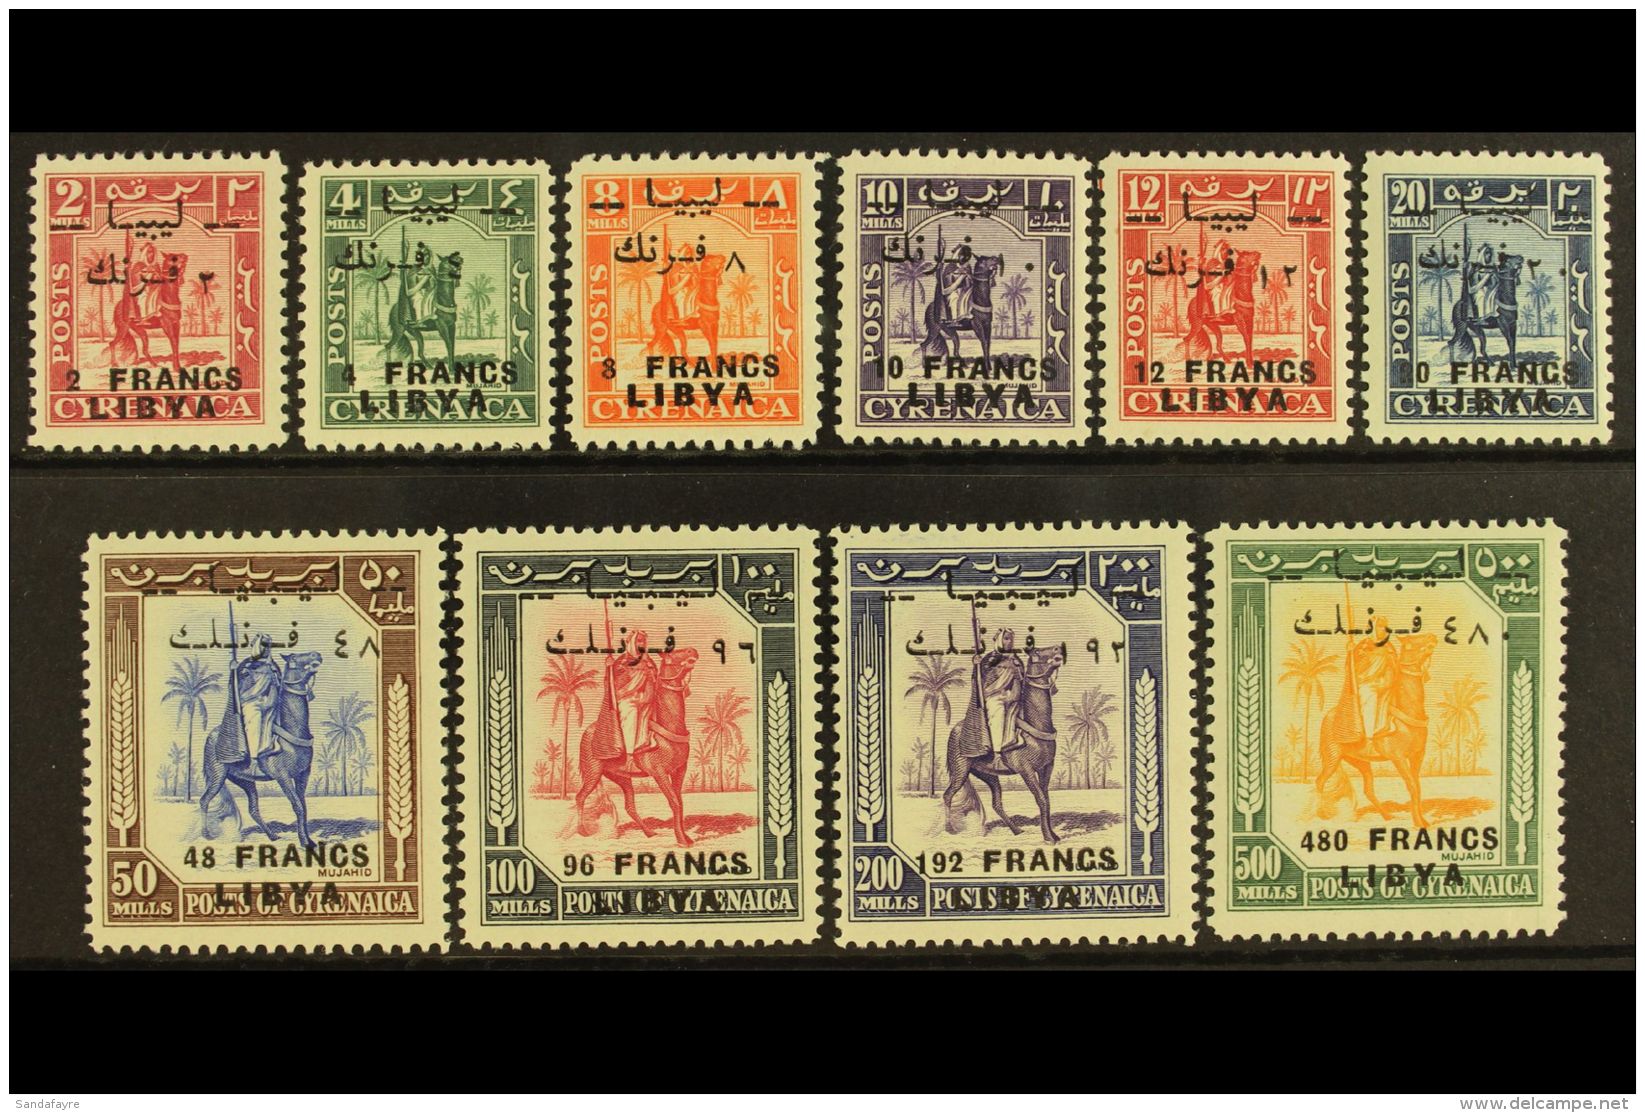 1951 Stamps Of Cyrenaica Overprinted And Surcharged In Francs, For Use In The Fezzan - The Complete Set (SG... - Libye